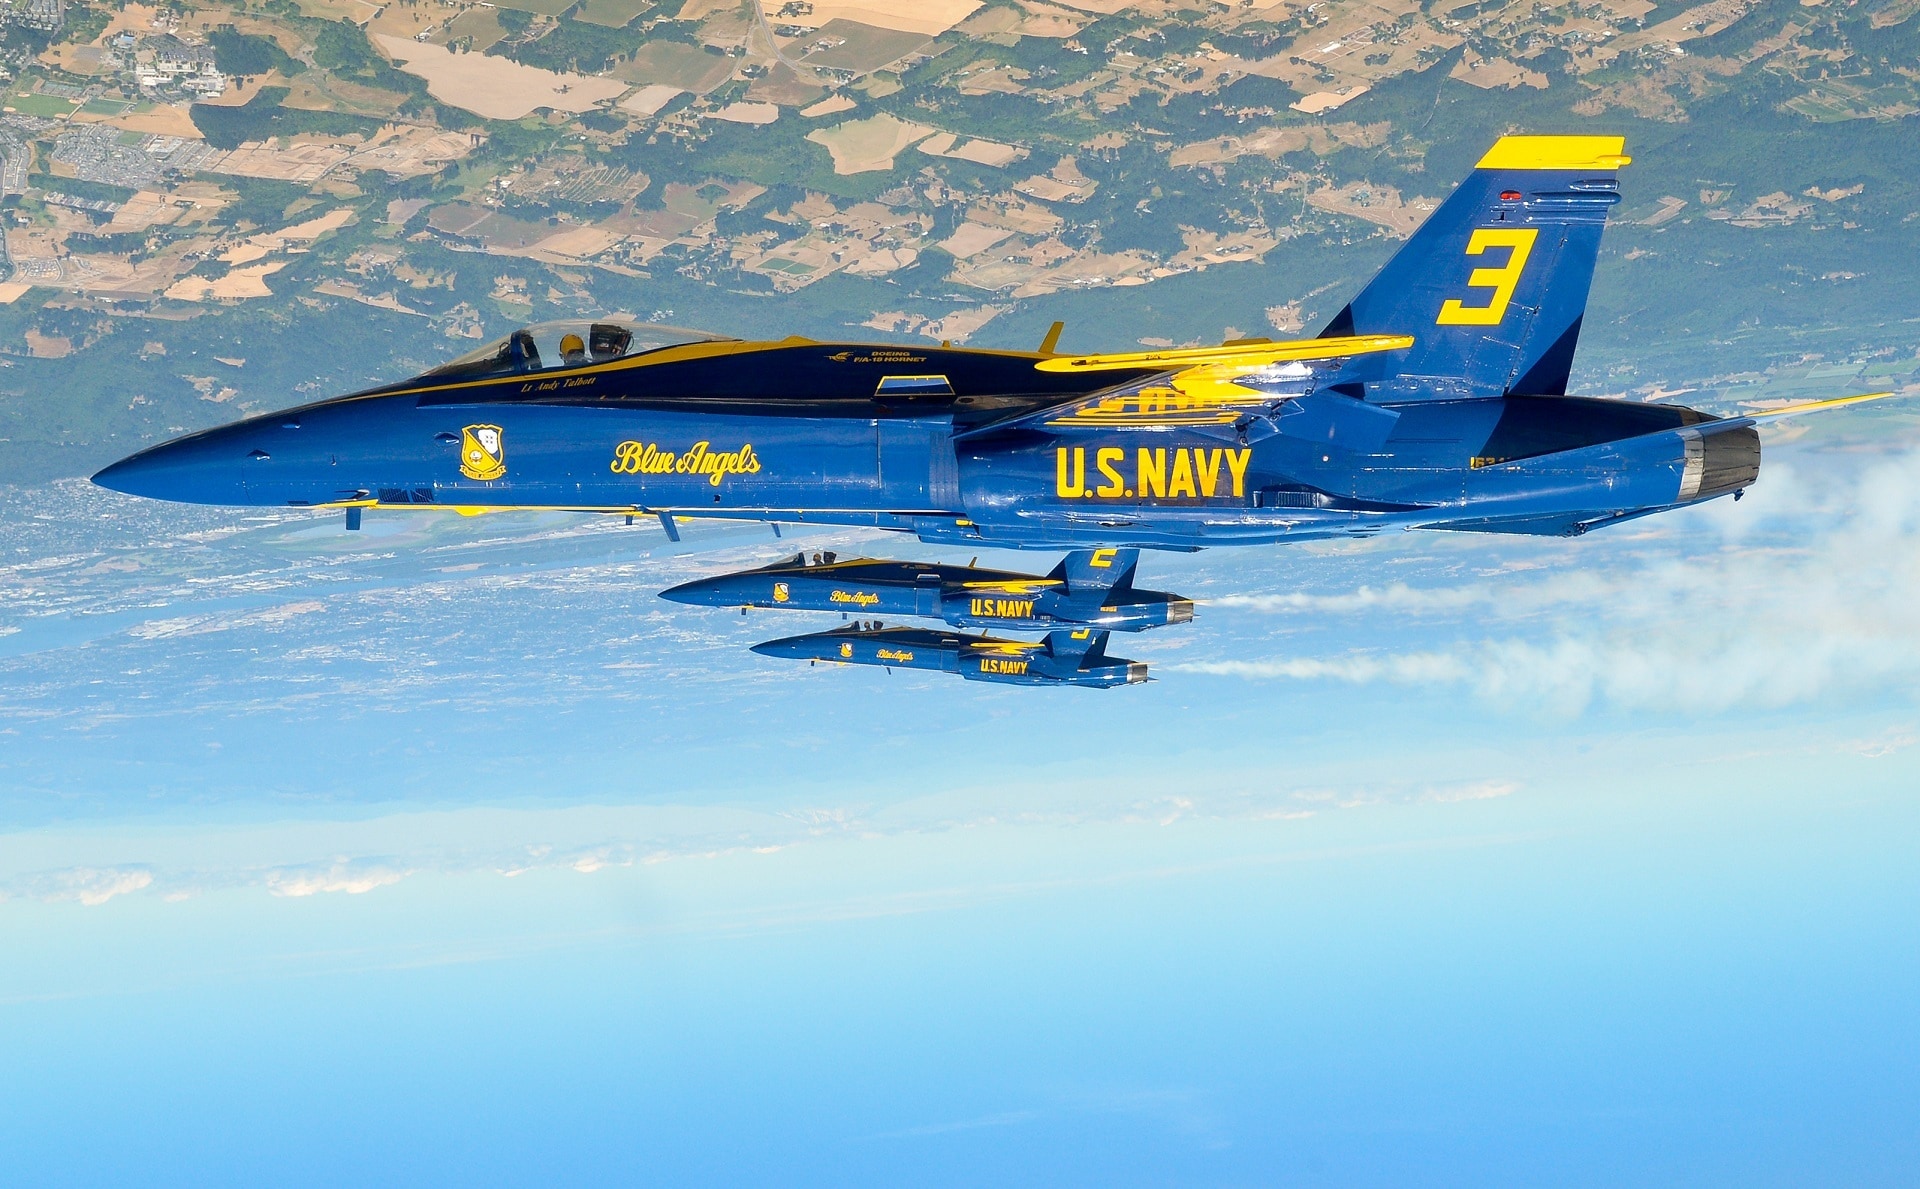 blue and yellow U.S. Navy plane